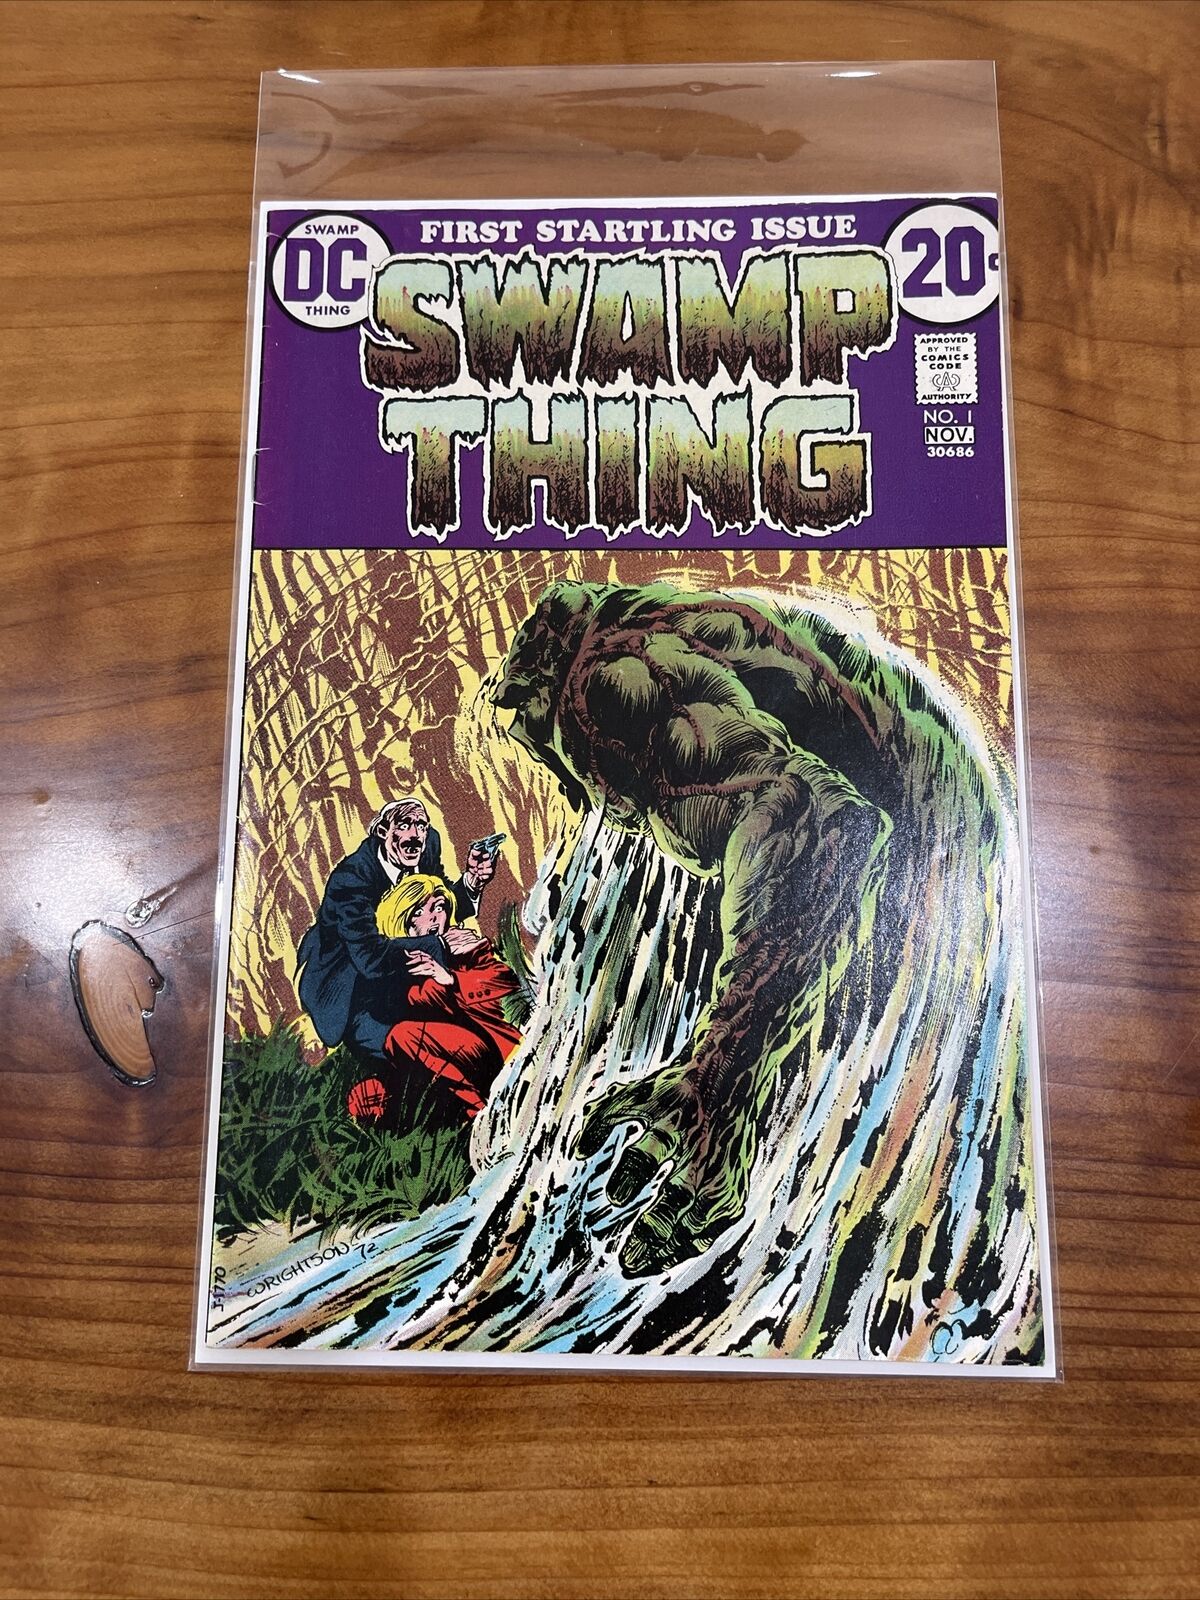 Swamp Thing #1 (Origin of Swamp Thing, 1st Solo Title, 1972) - Bright Colors